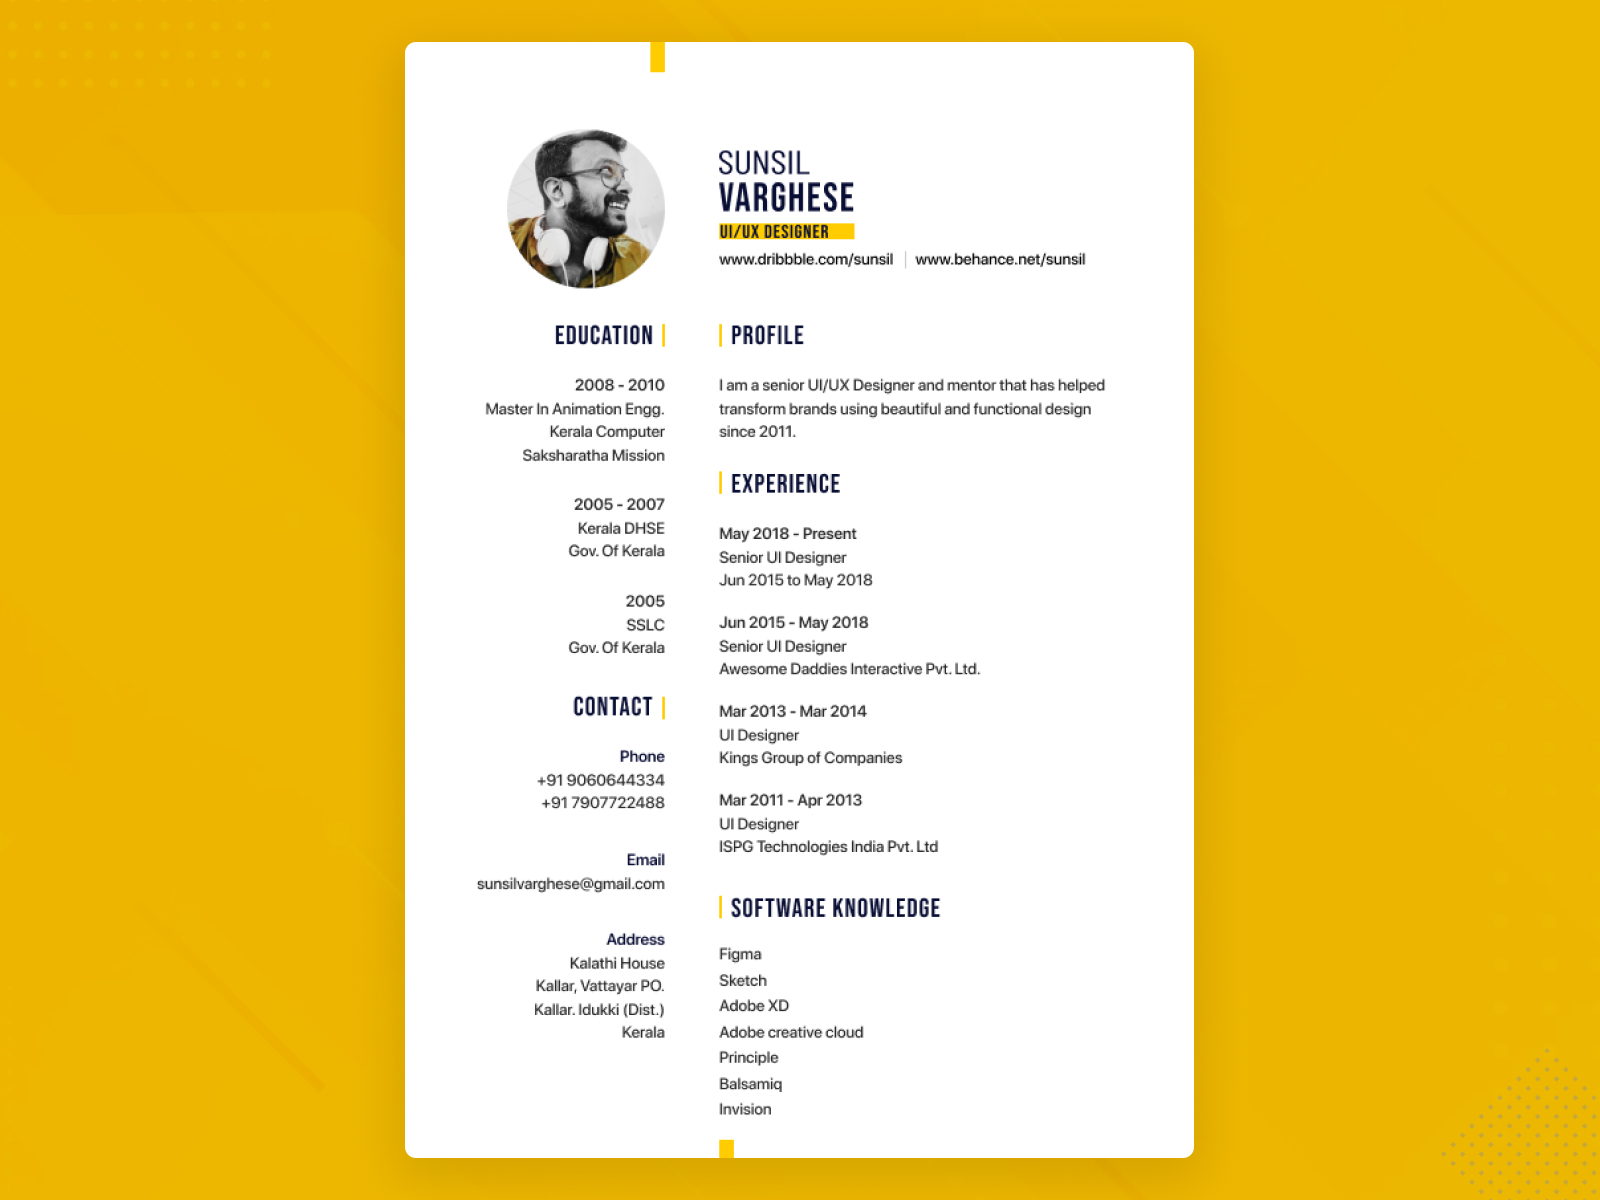 Resume Example by Sunsil Varghese on Dribbble